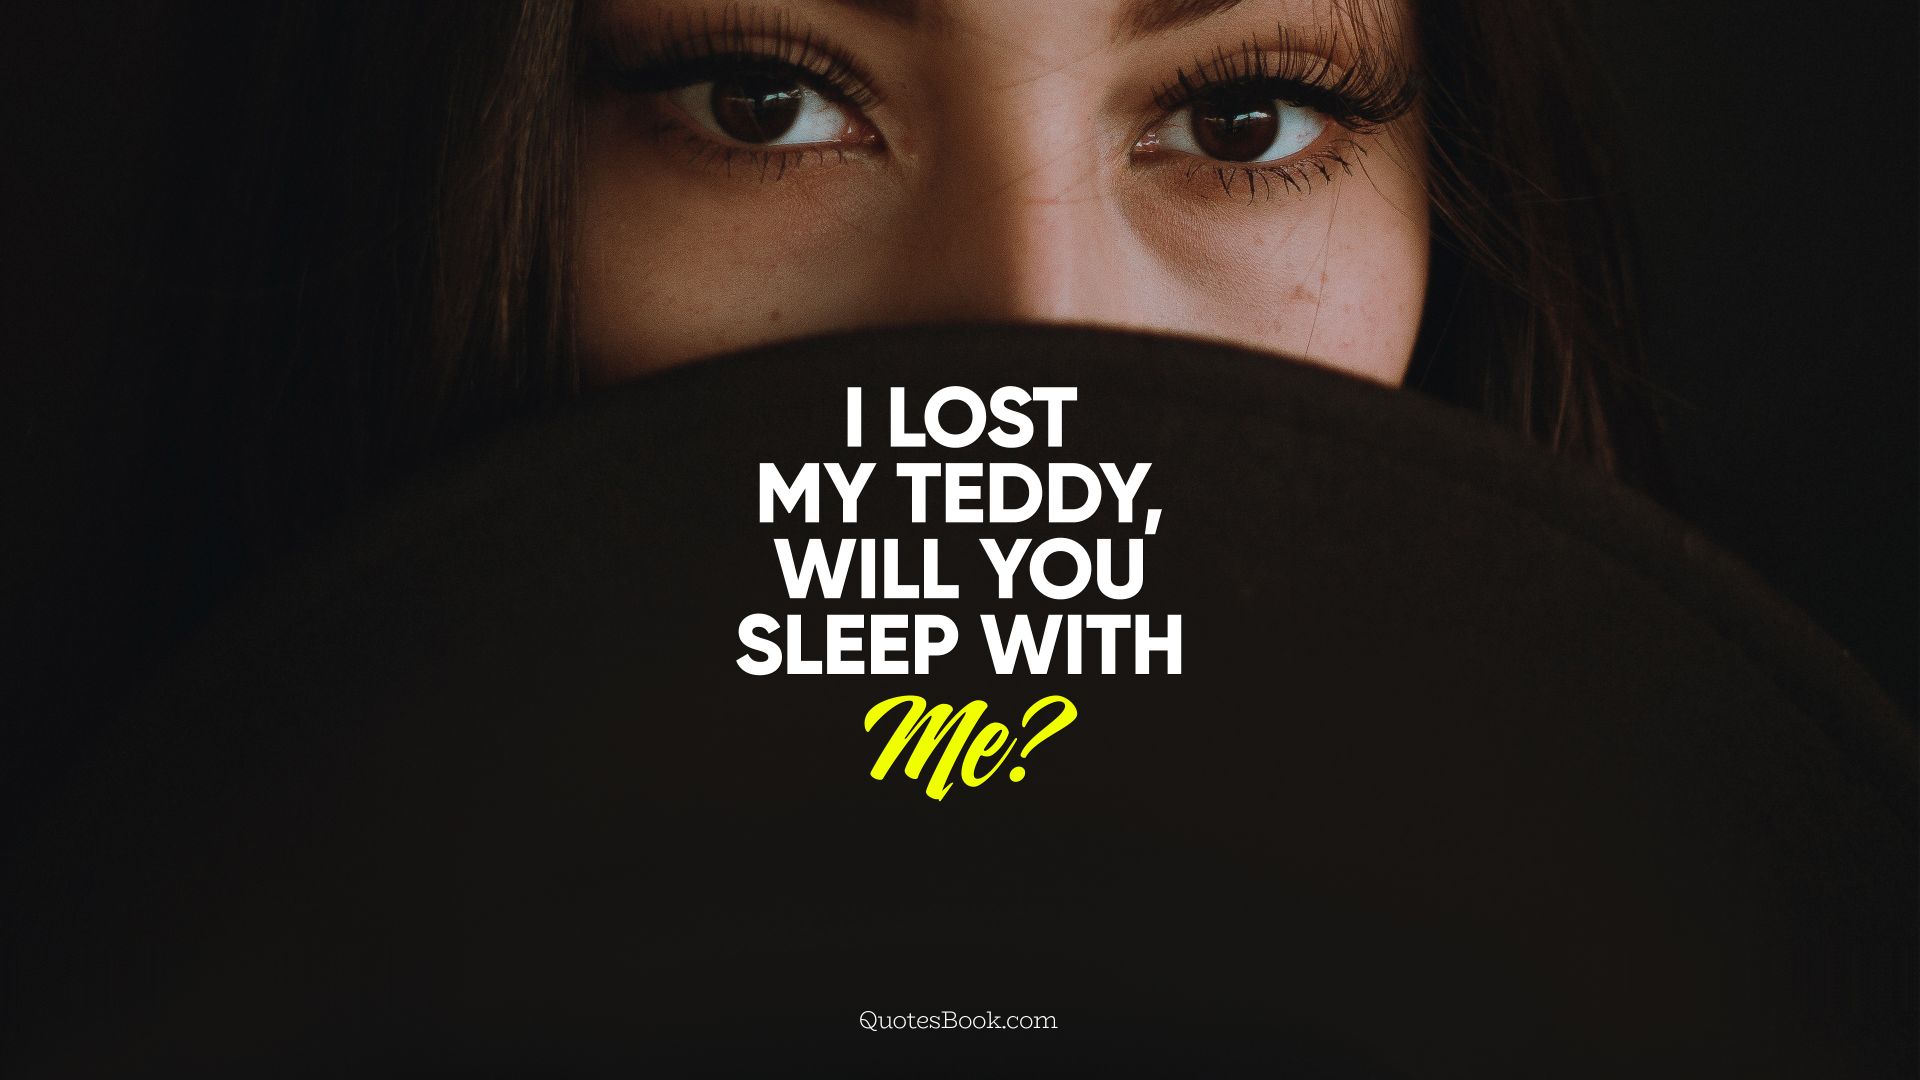 I lost my teddy, will you sleep with me?